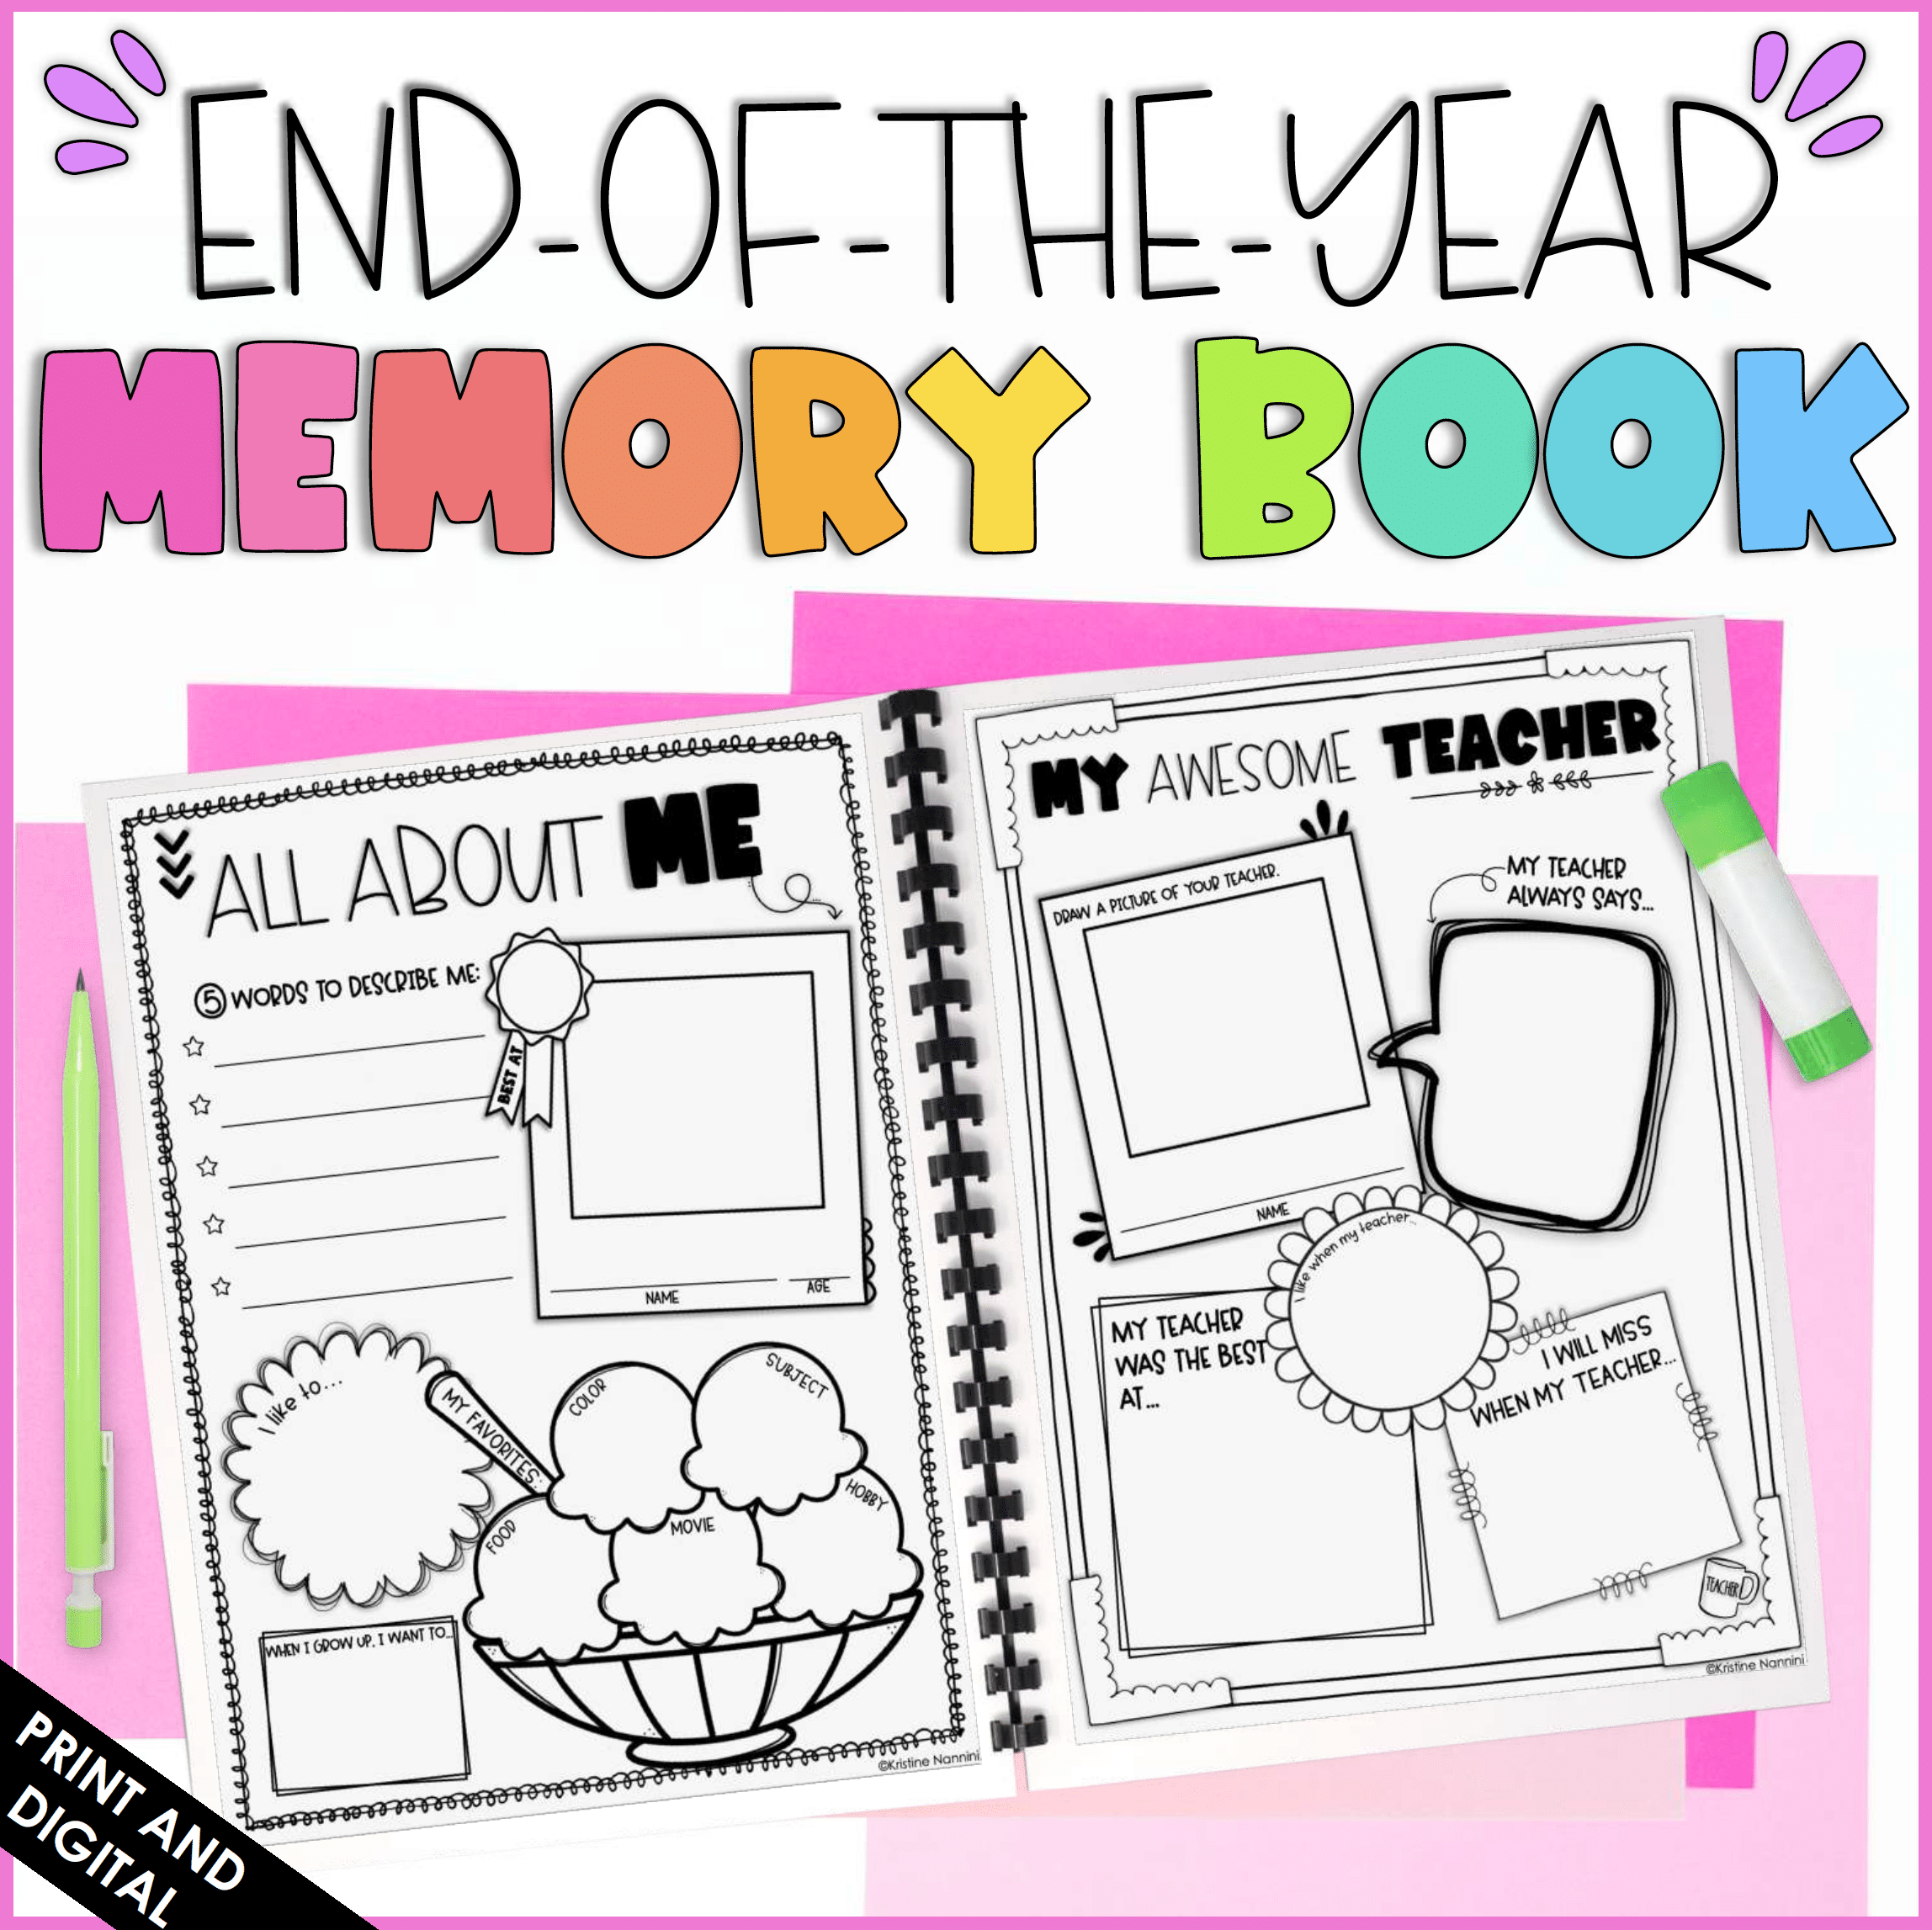 End of the Year Memory Book - In the Classroom with Kristine Nannini